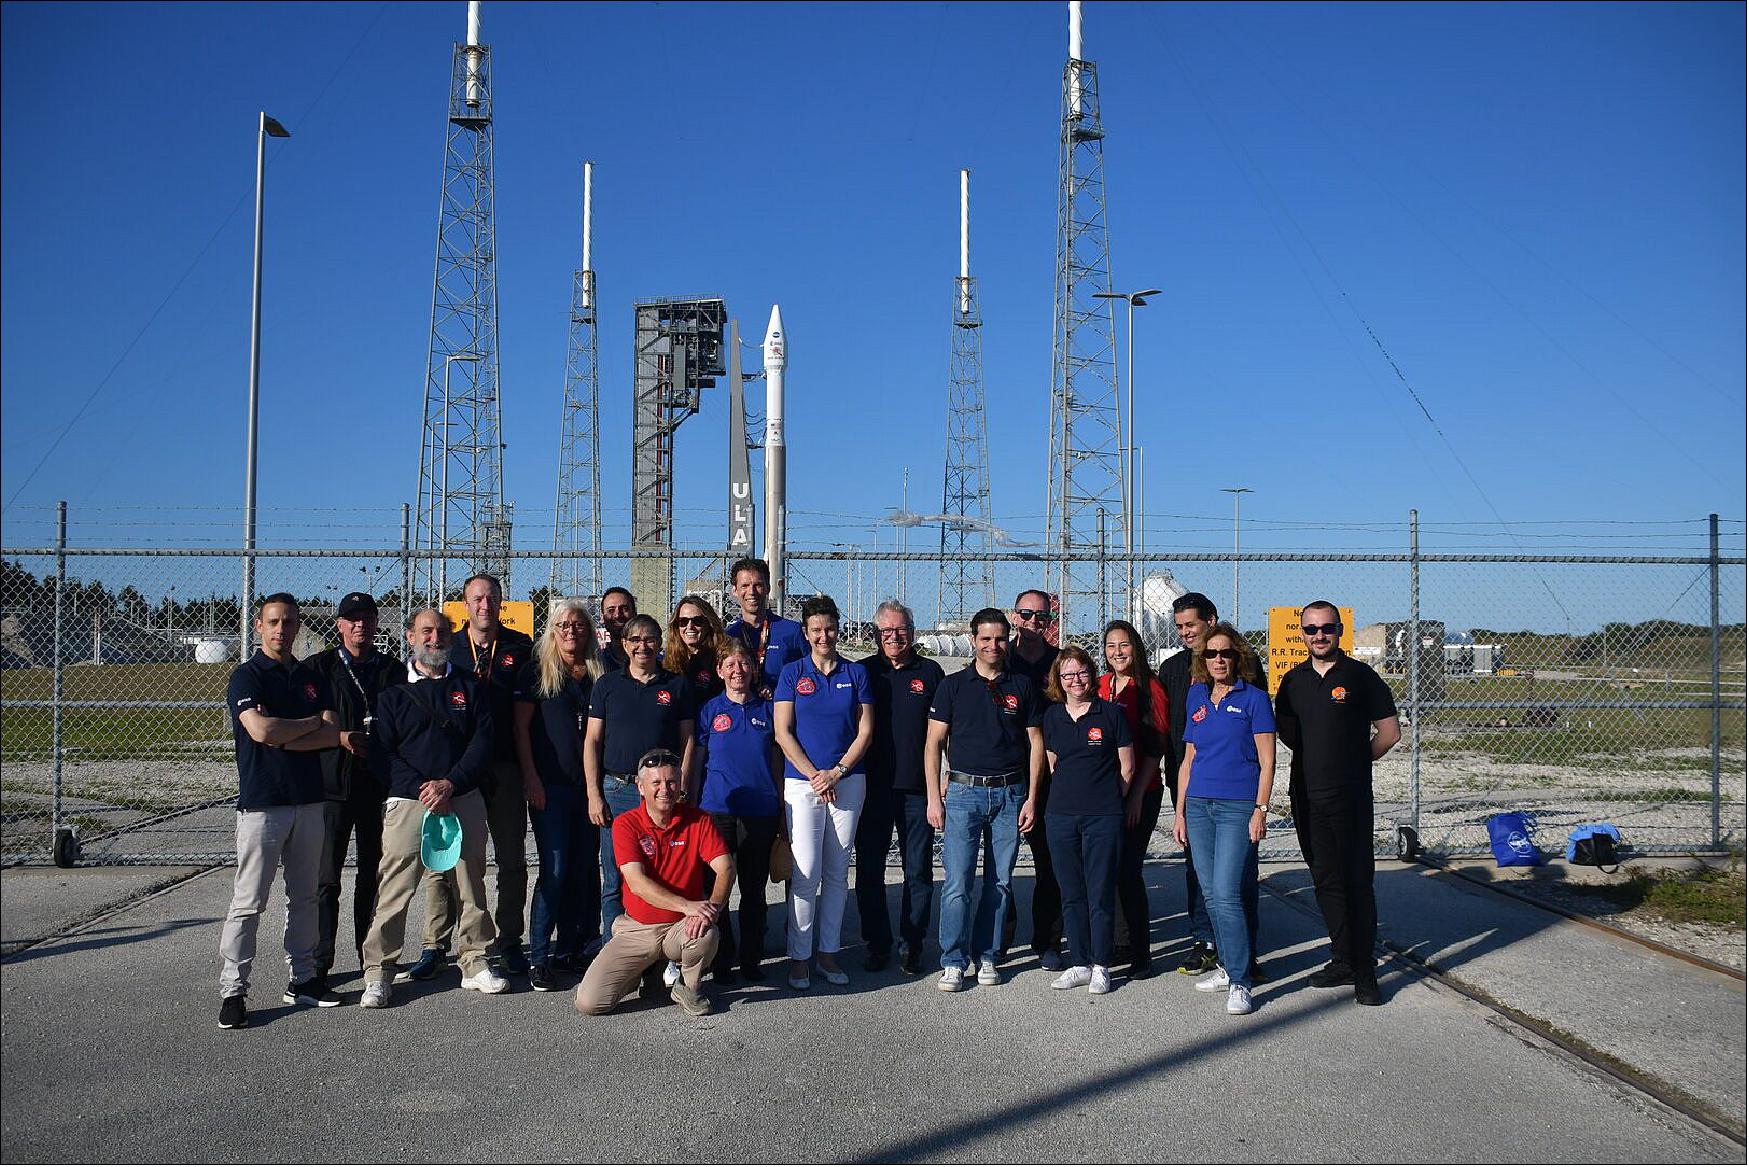 Figure 13: The ESA Solar Orbiter team, along with ESA Director of Science Günther Hasinger (eighth from the right), at the launch pad at NASA's Kennedy Space Center in Florida, US, on Sunday 9 February 2020. In the background, the Atlas V 411 rocket that would lift the spacecraft into space several hours later(photo credit: ESA, P. Olivier)